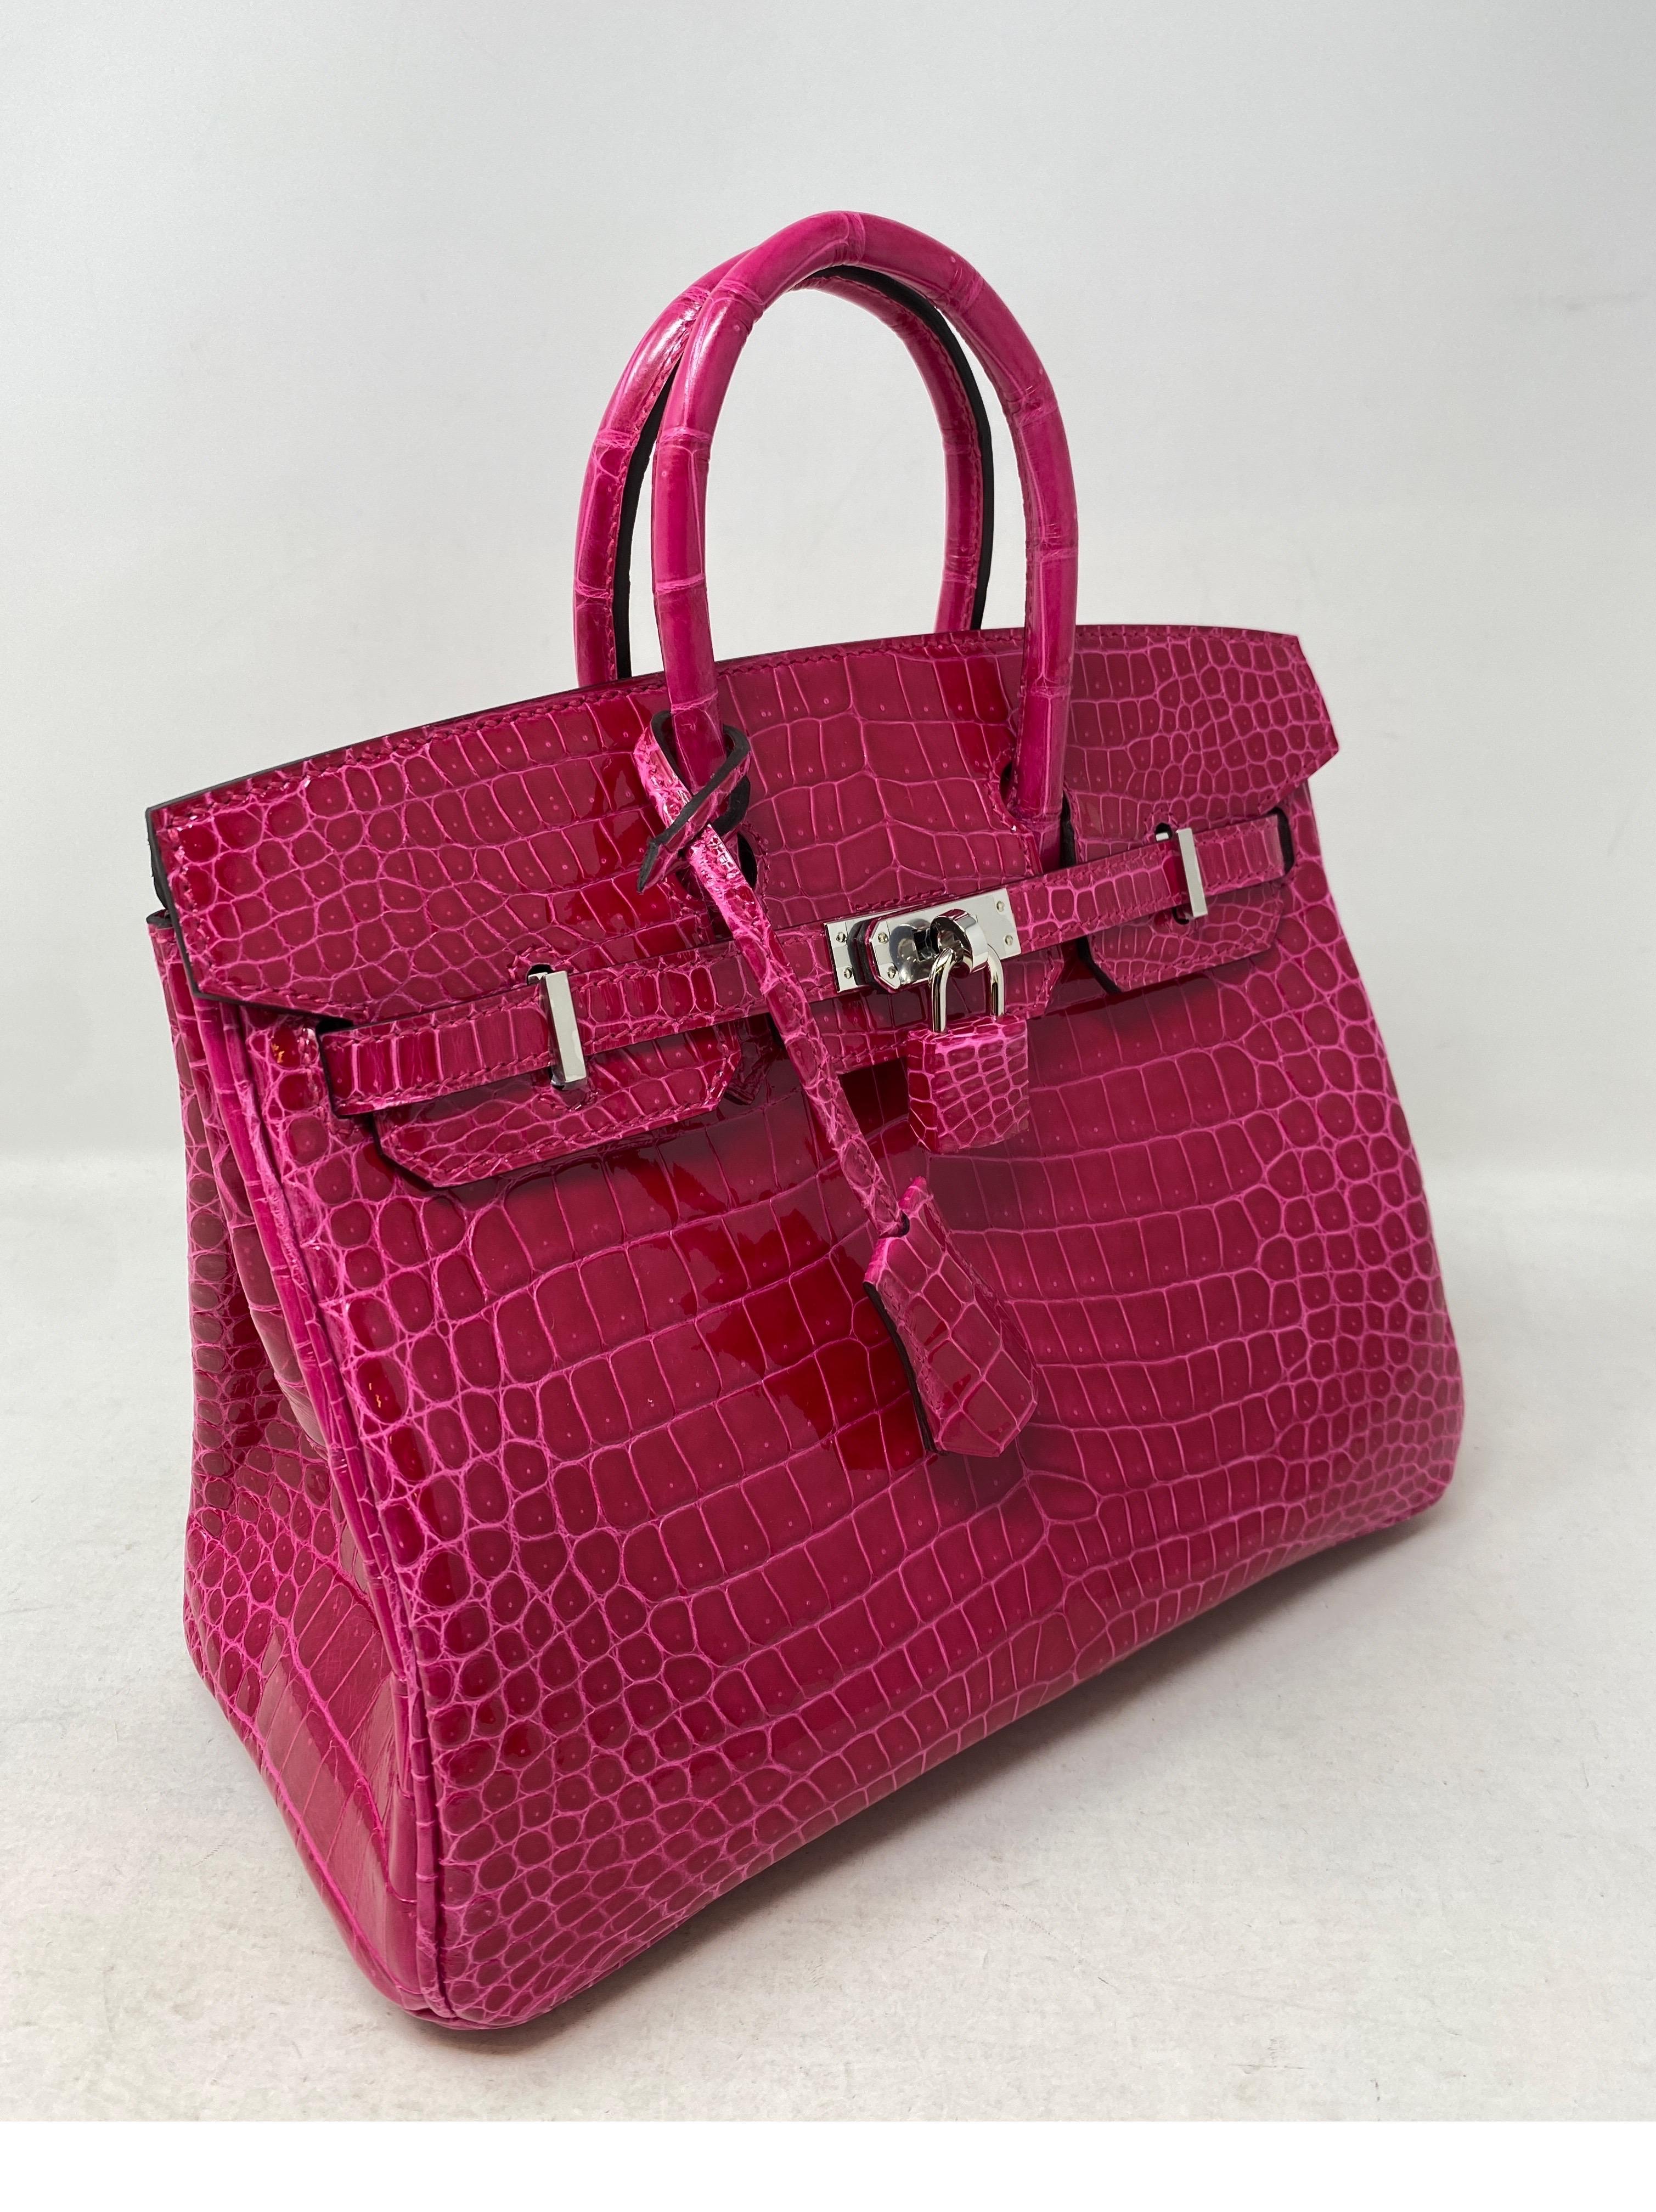 Hermes Birkin 25 Rose Mexico Shiny Alligator Bag. Brand new 2022 with receipt and Cites certificate. Extremely rare and highly coveted size 25 Birkin in exotic alligator. Stunning pink Rose Mexico color with palladium hardware. A great investment